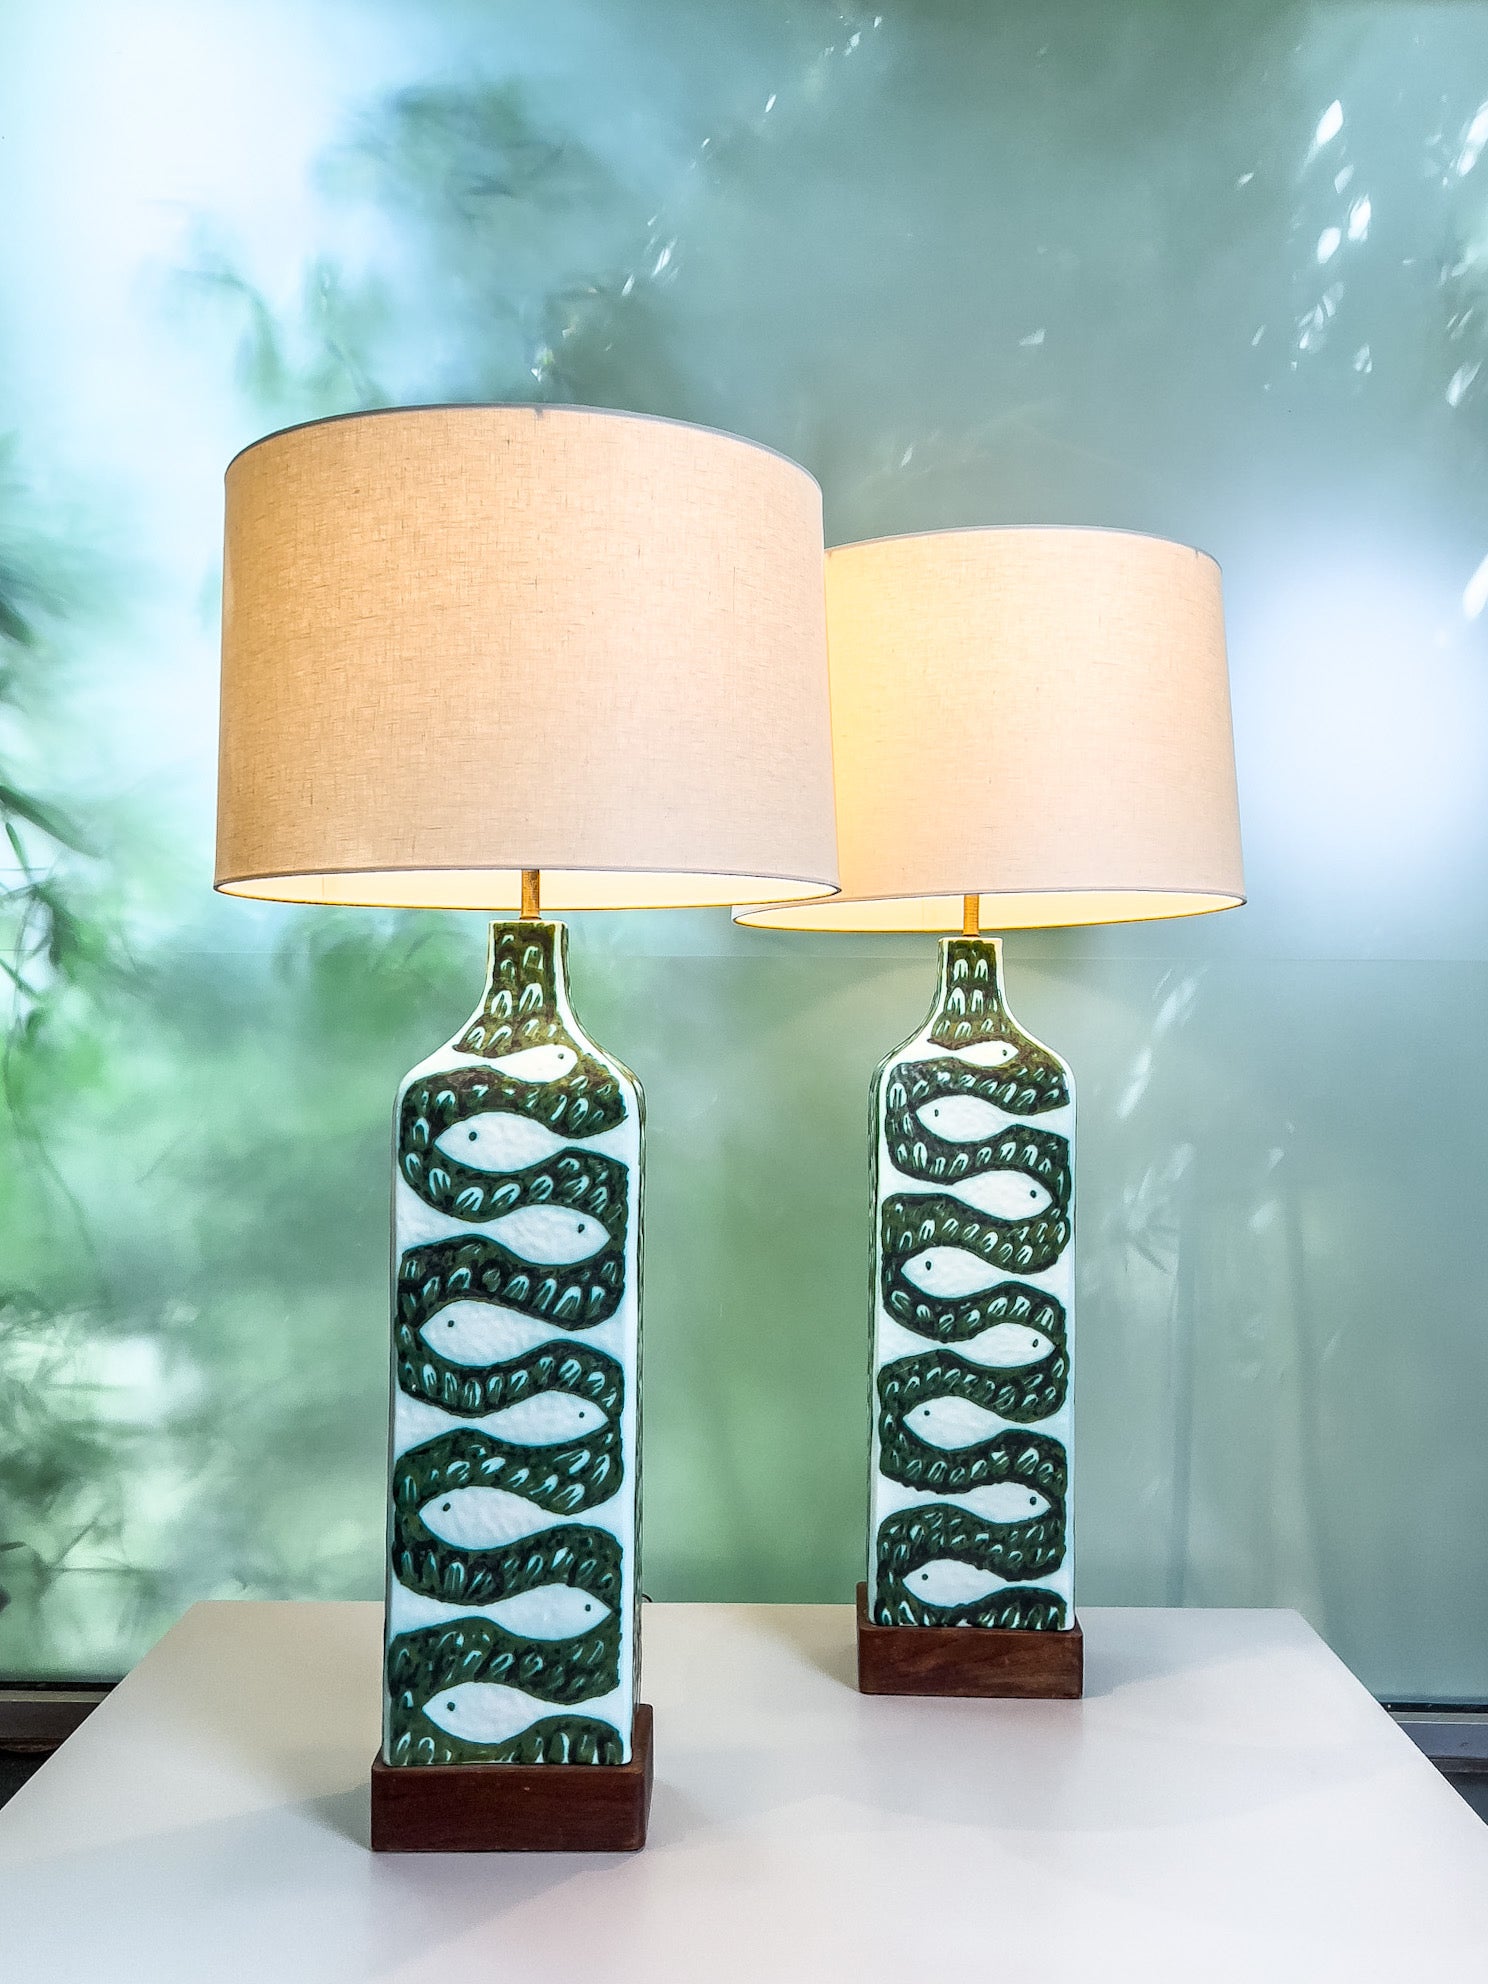 A large pair of ceramic lamps with birds on one side and fish on the other sitting on a walnut base. Designed by Alessio Tasca for Raymor. Rewired.